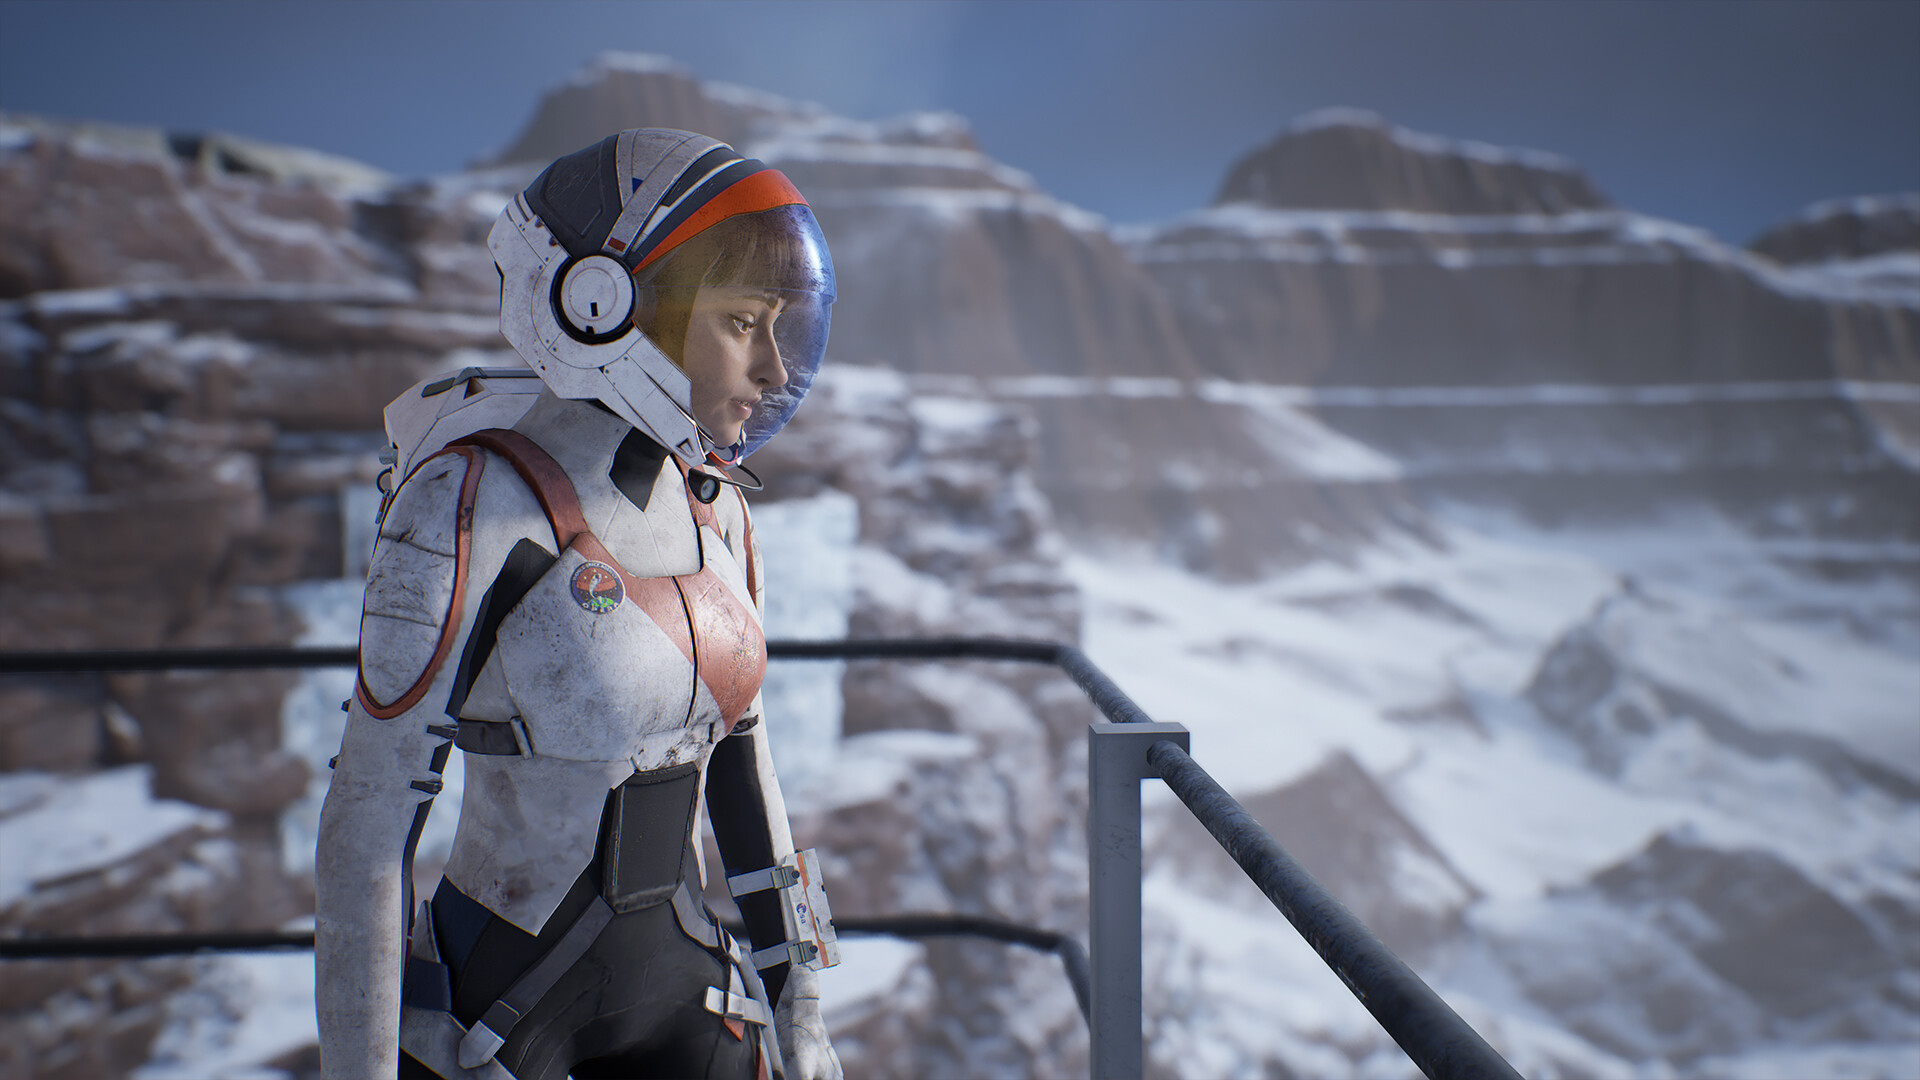 Deliver Us Mars Developer KeokeN Interactive Hit By Layoffs. 4 Persons Affected